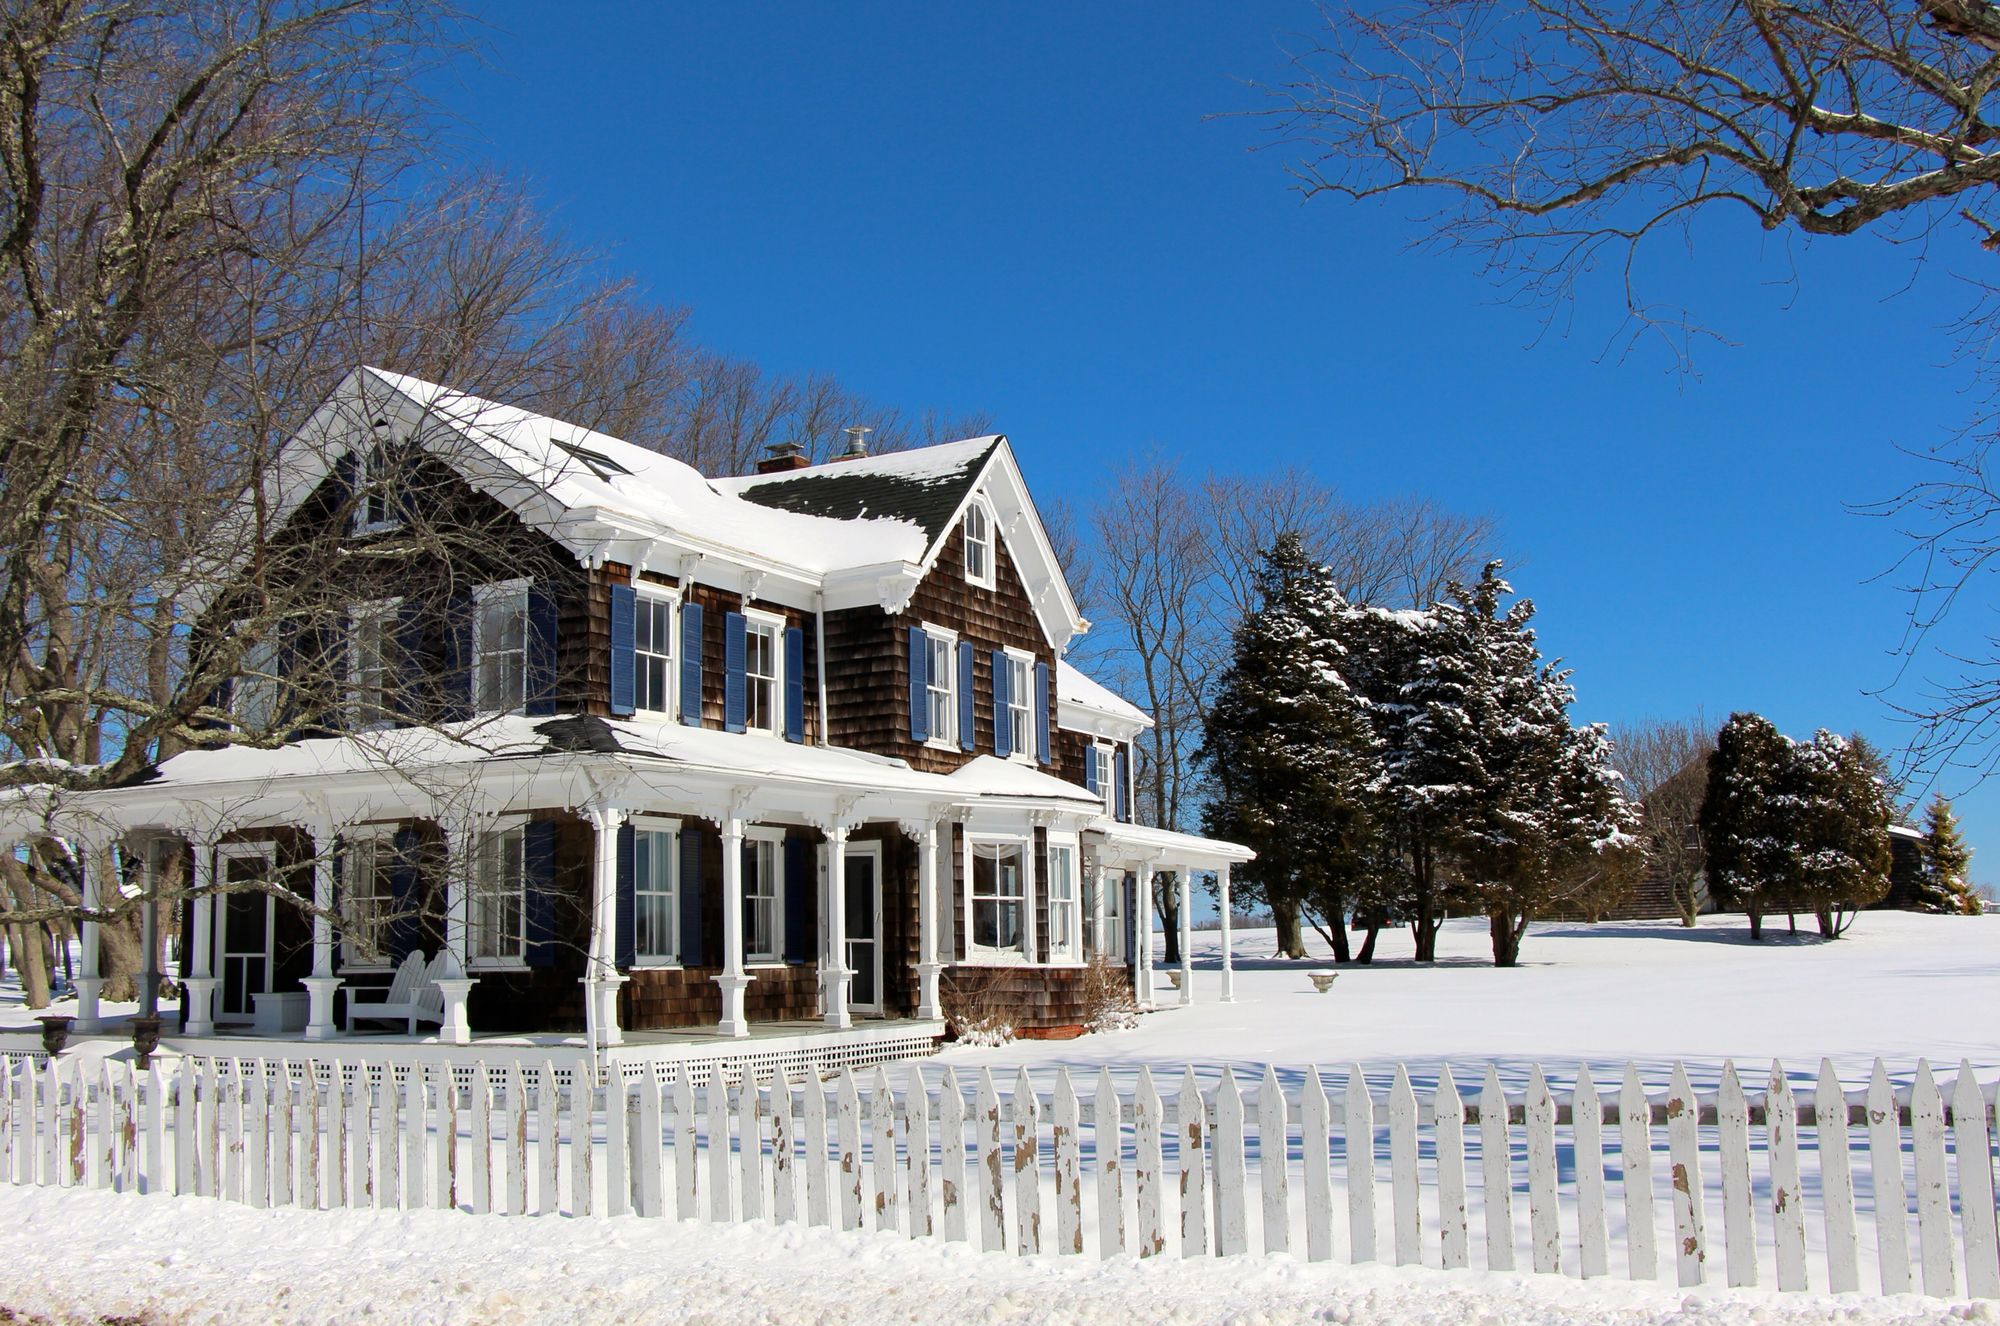 House in the Hamptons covered in snow